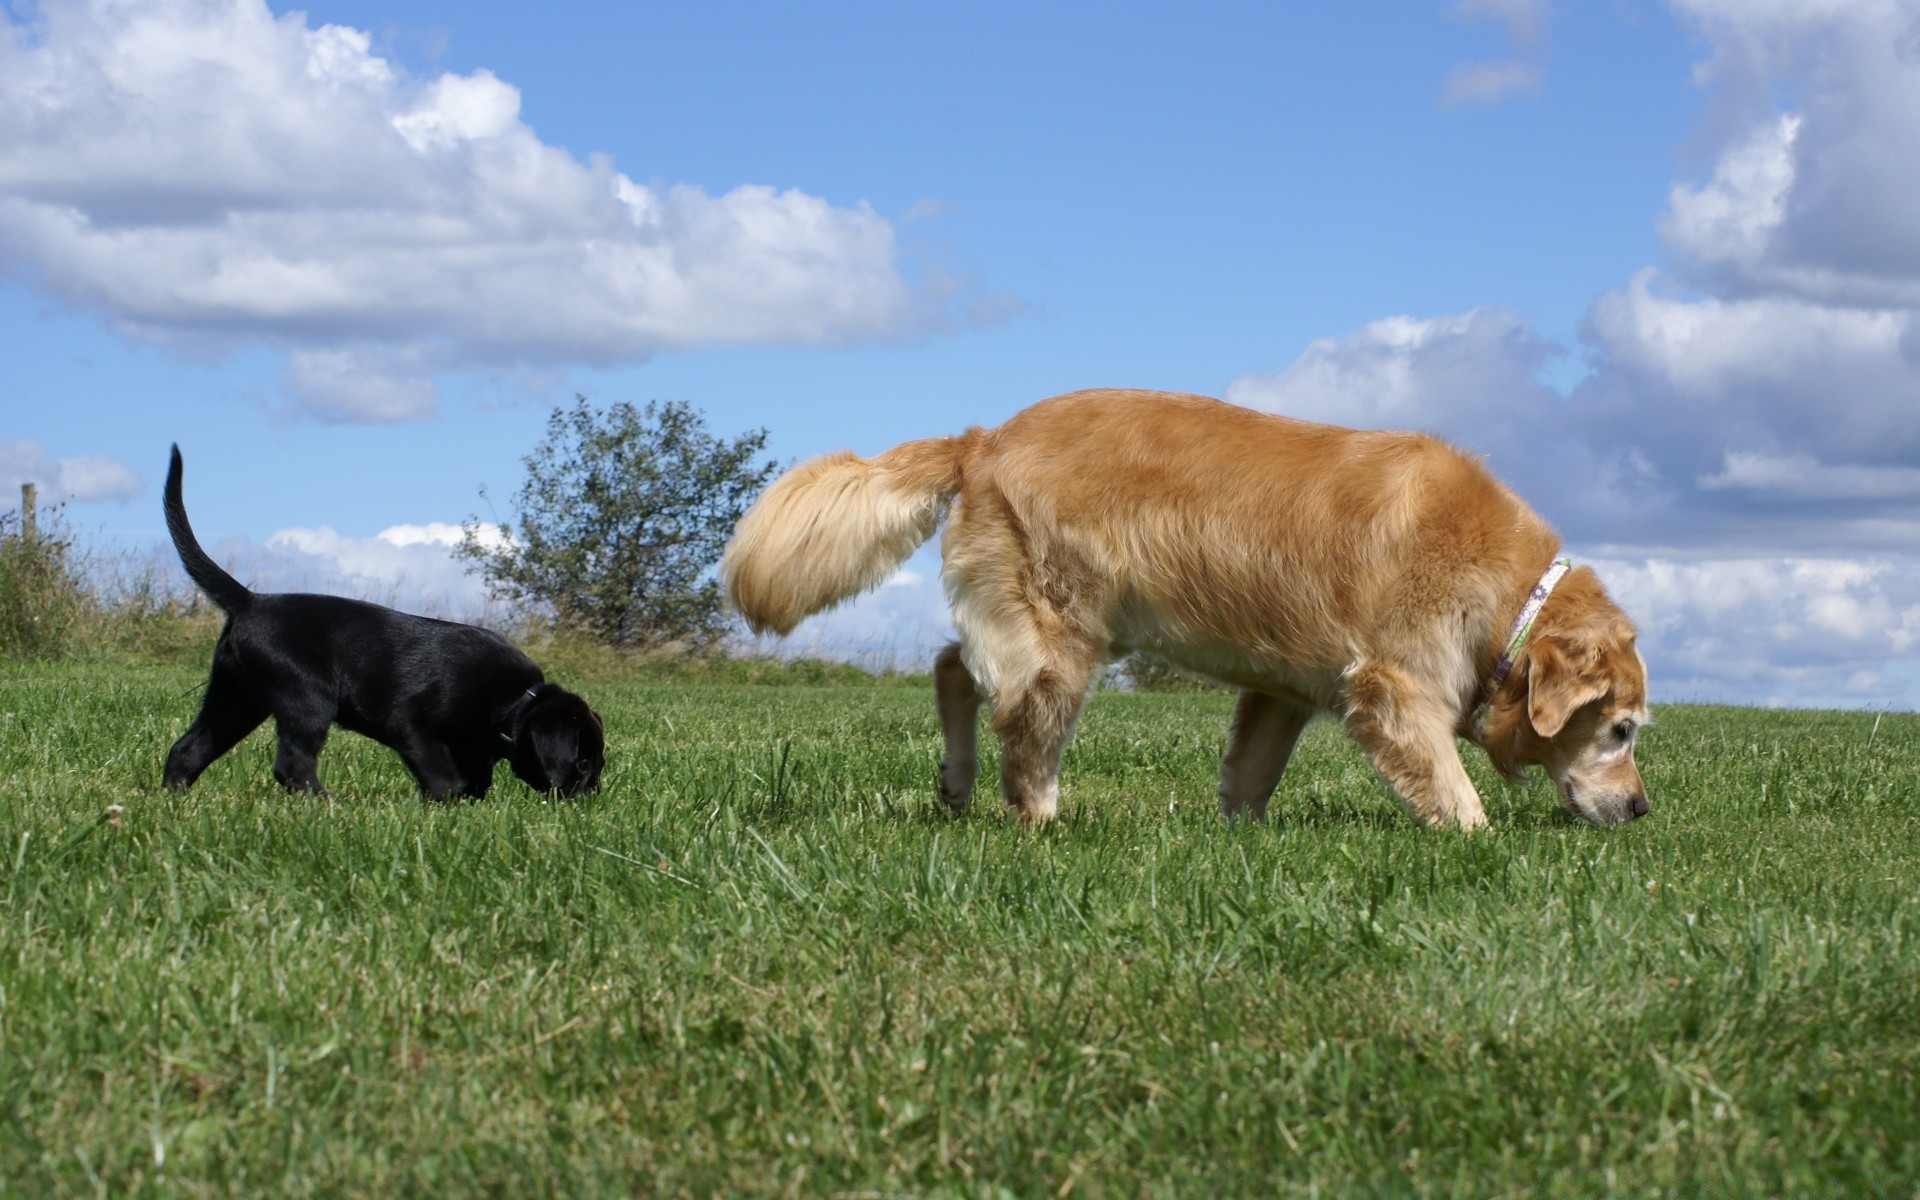 dogs mammal grass animal hayfield cattle field dog farm livestock breed domestic grassland pet canine agriculture cow